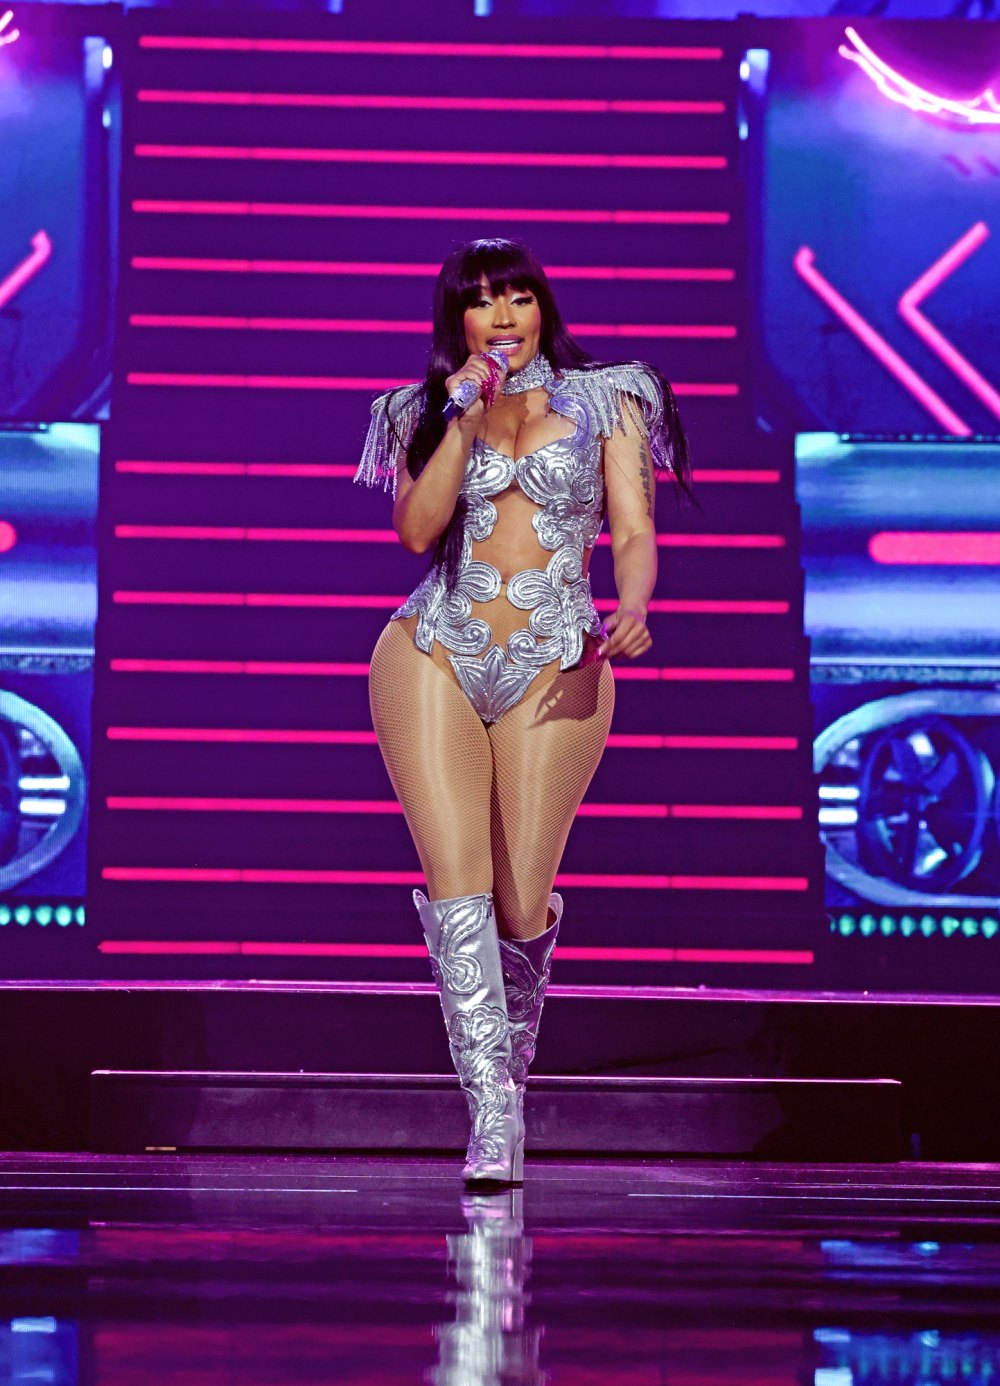 Nicki Minaj Whole Boob Fell Out of Her Dress While Performing